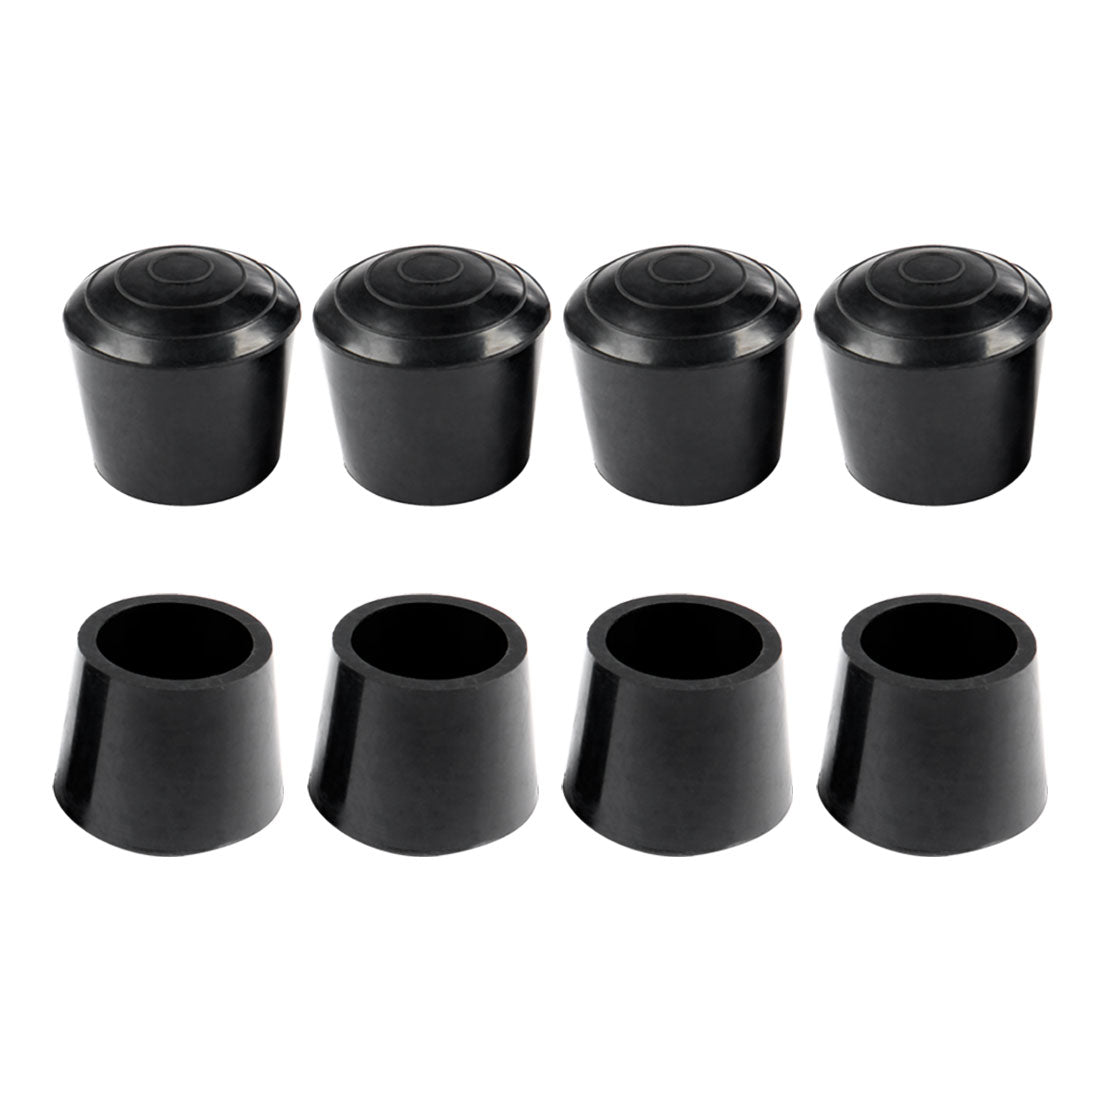 uxcell Uxcell Rubber Leg Cap Tip Cup Feet Cover 30mm 1 1/8" Inner Dia 8pcs for Furniture Desk